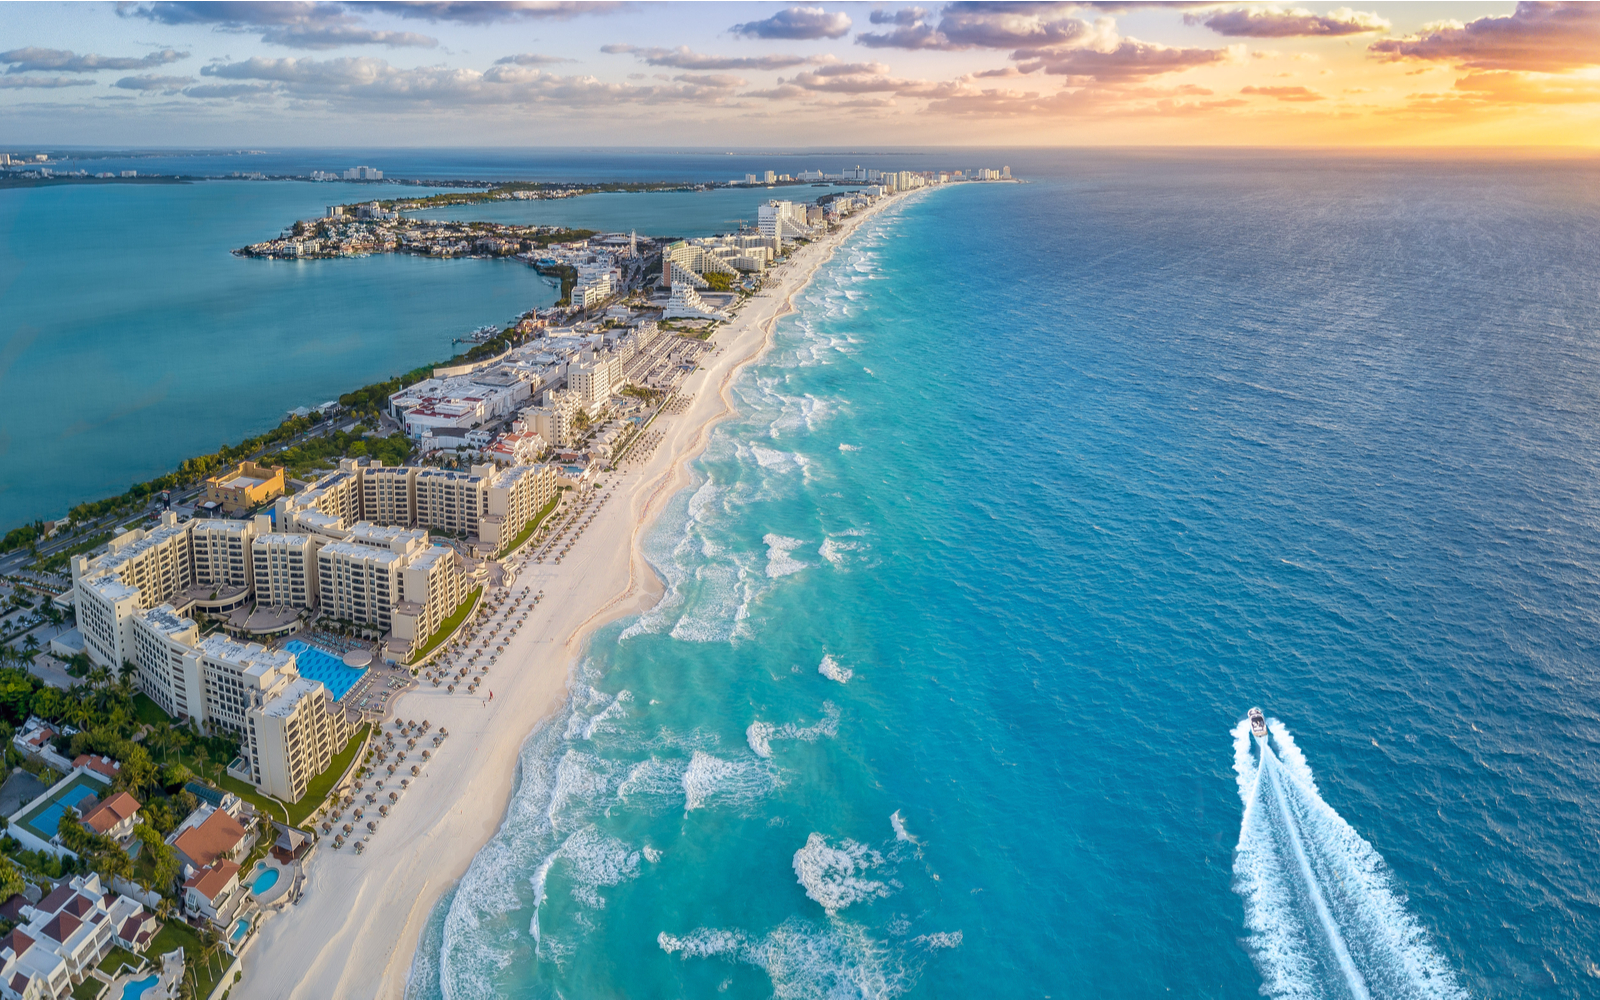 The Best Time to Visit Cancun in 2022